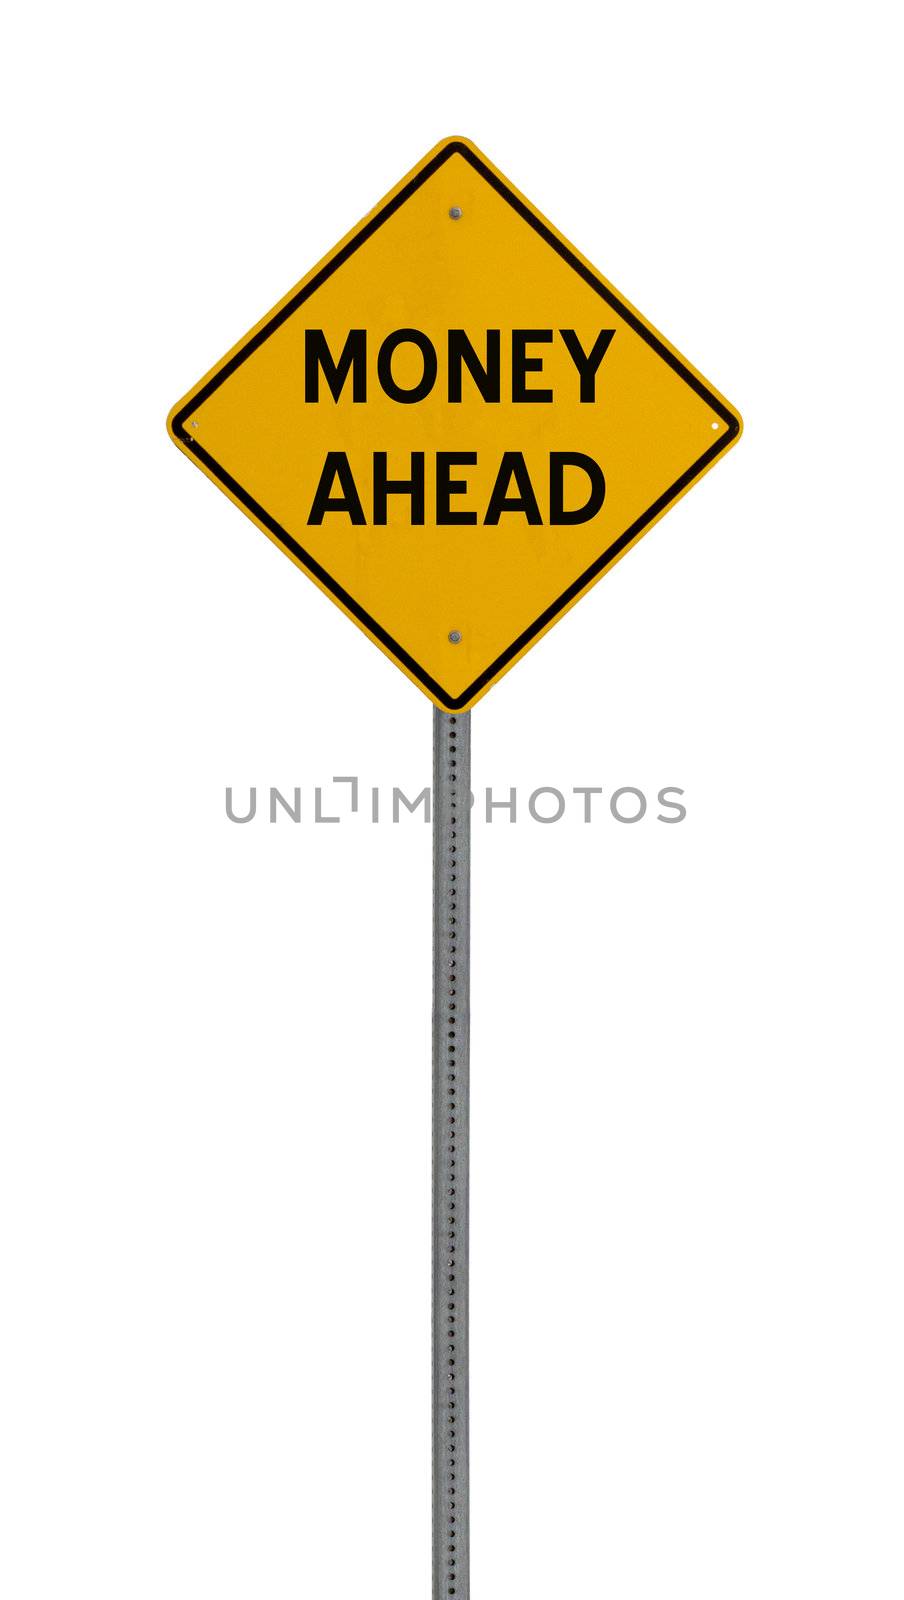 money ahead - Yellow road warning sign by jeremywhat